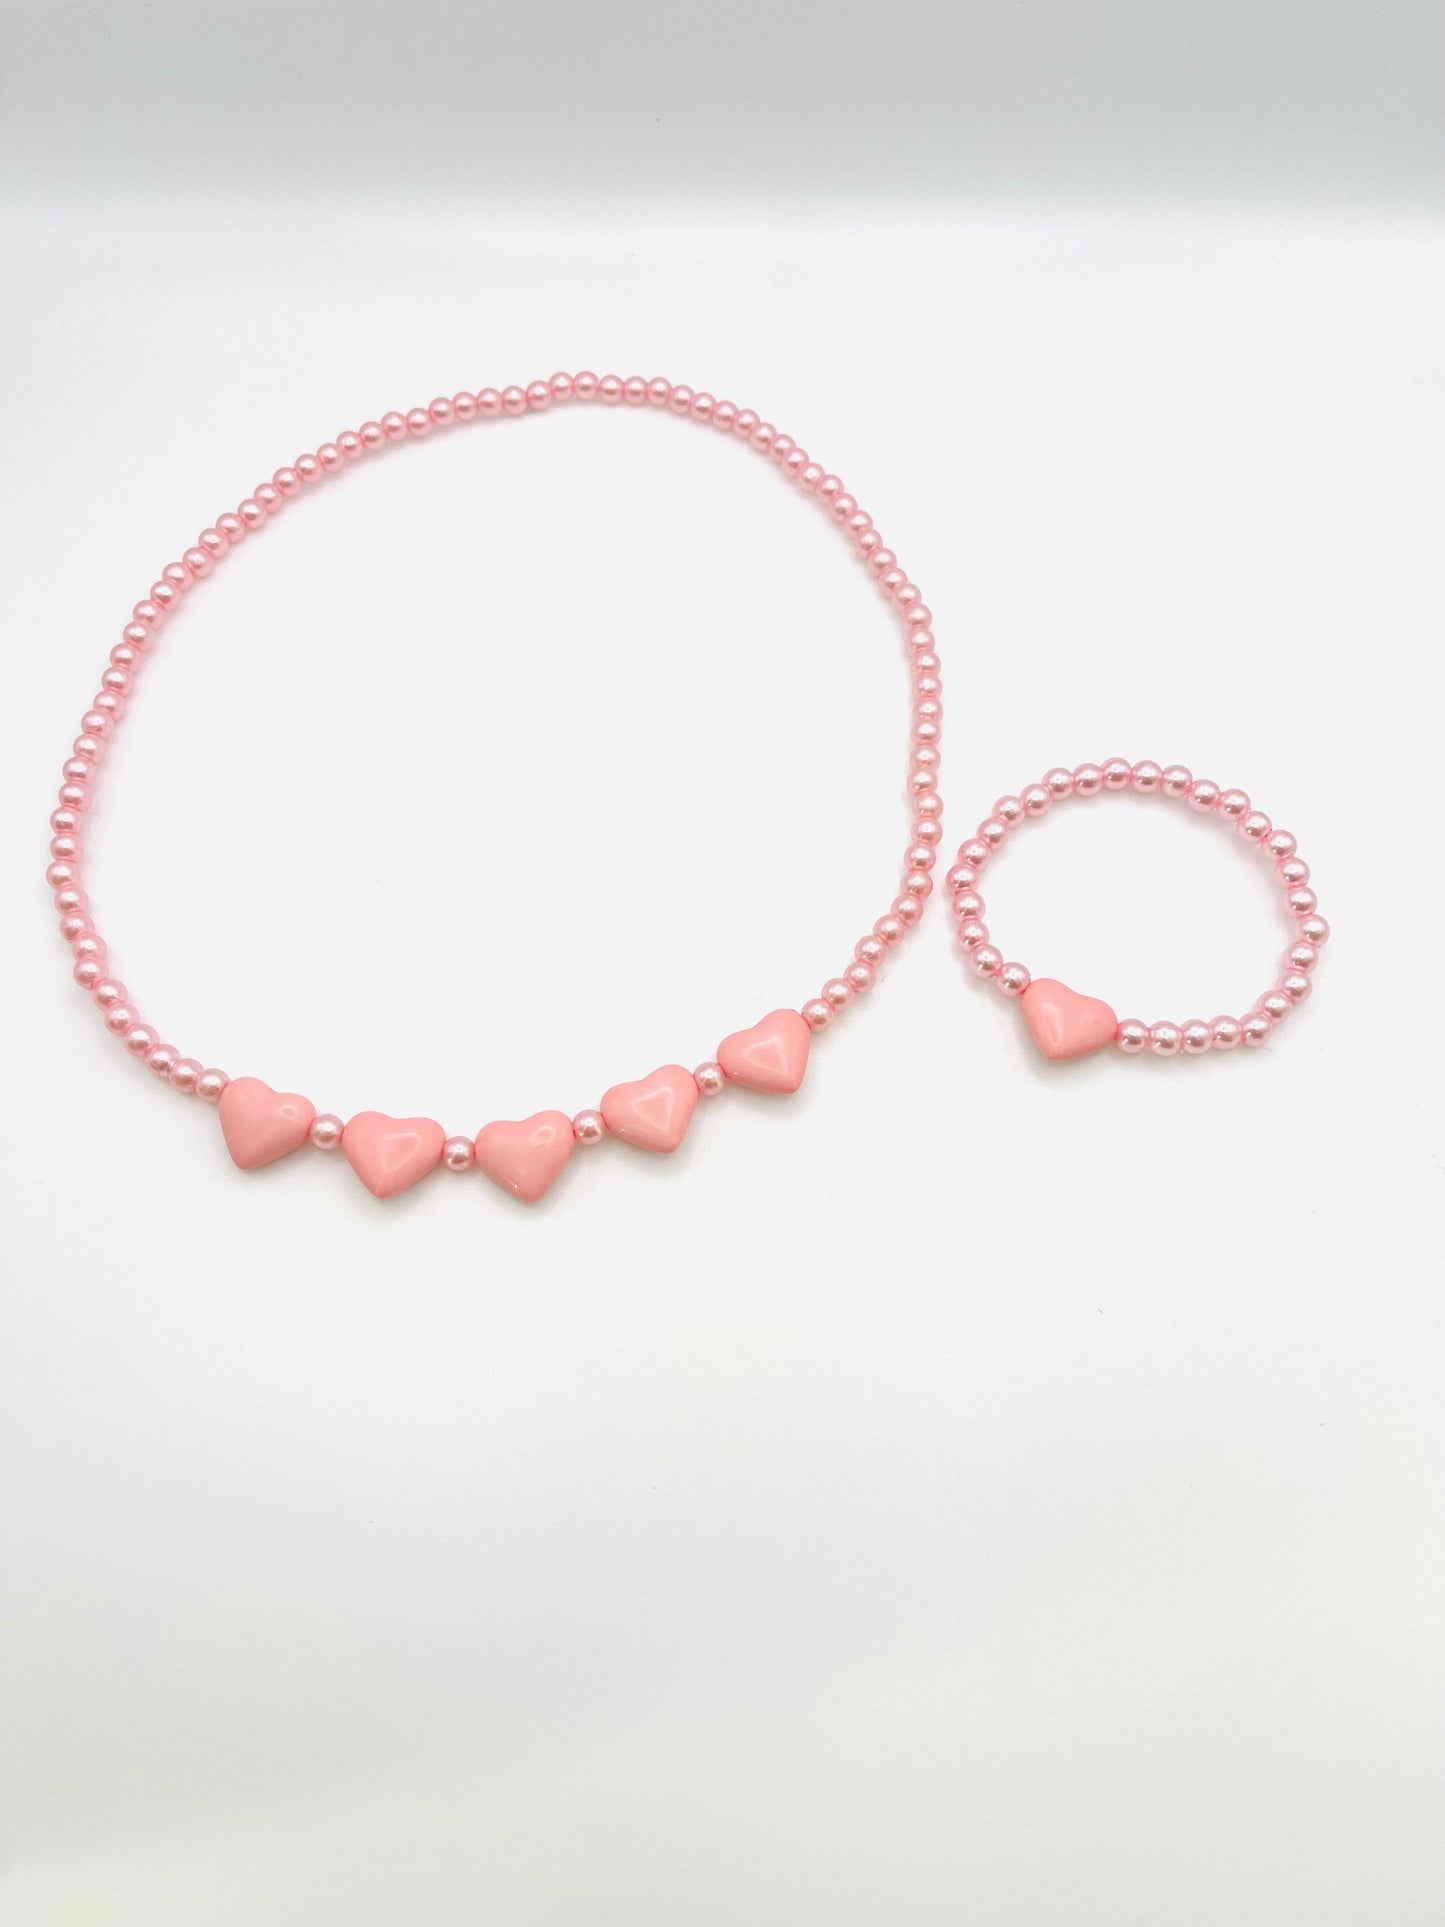 Fashionably, BBK! Accessories Pink Girls Beaded Heart Necklace and Bracelet Set